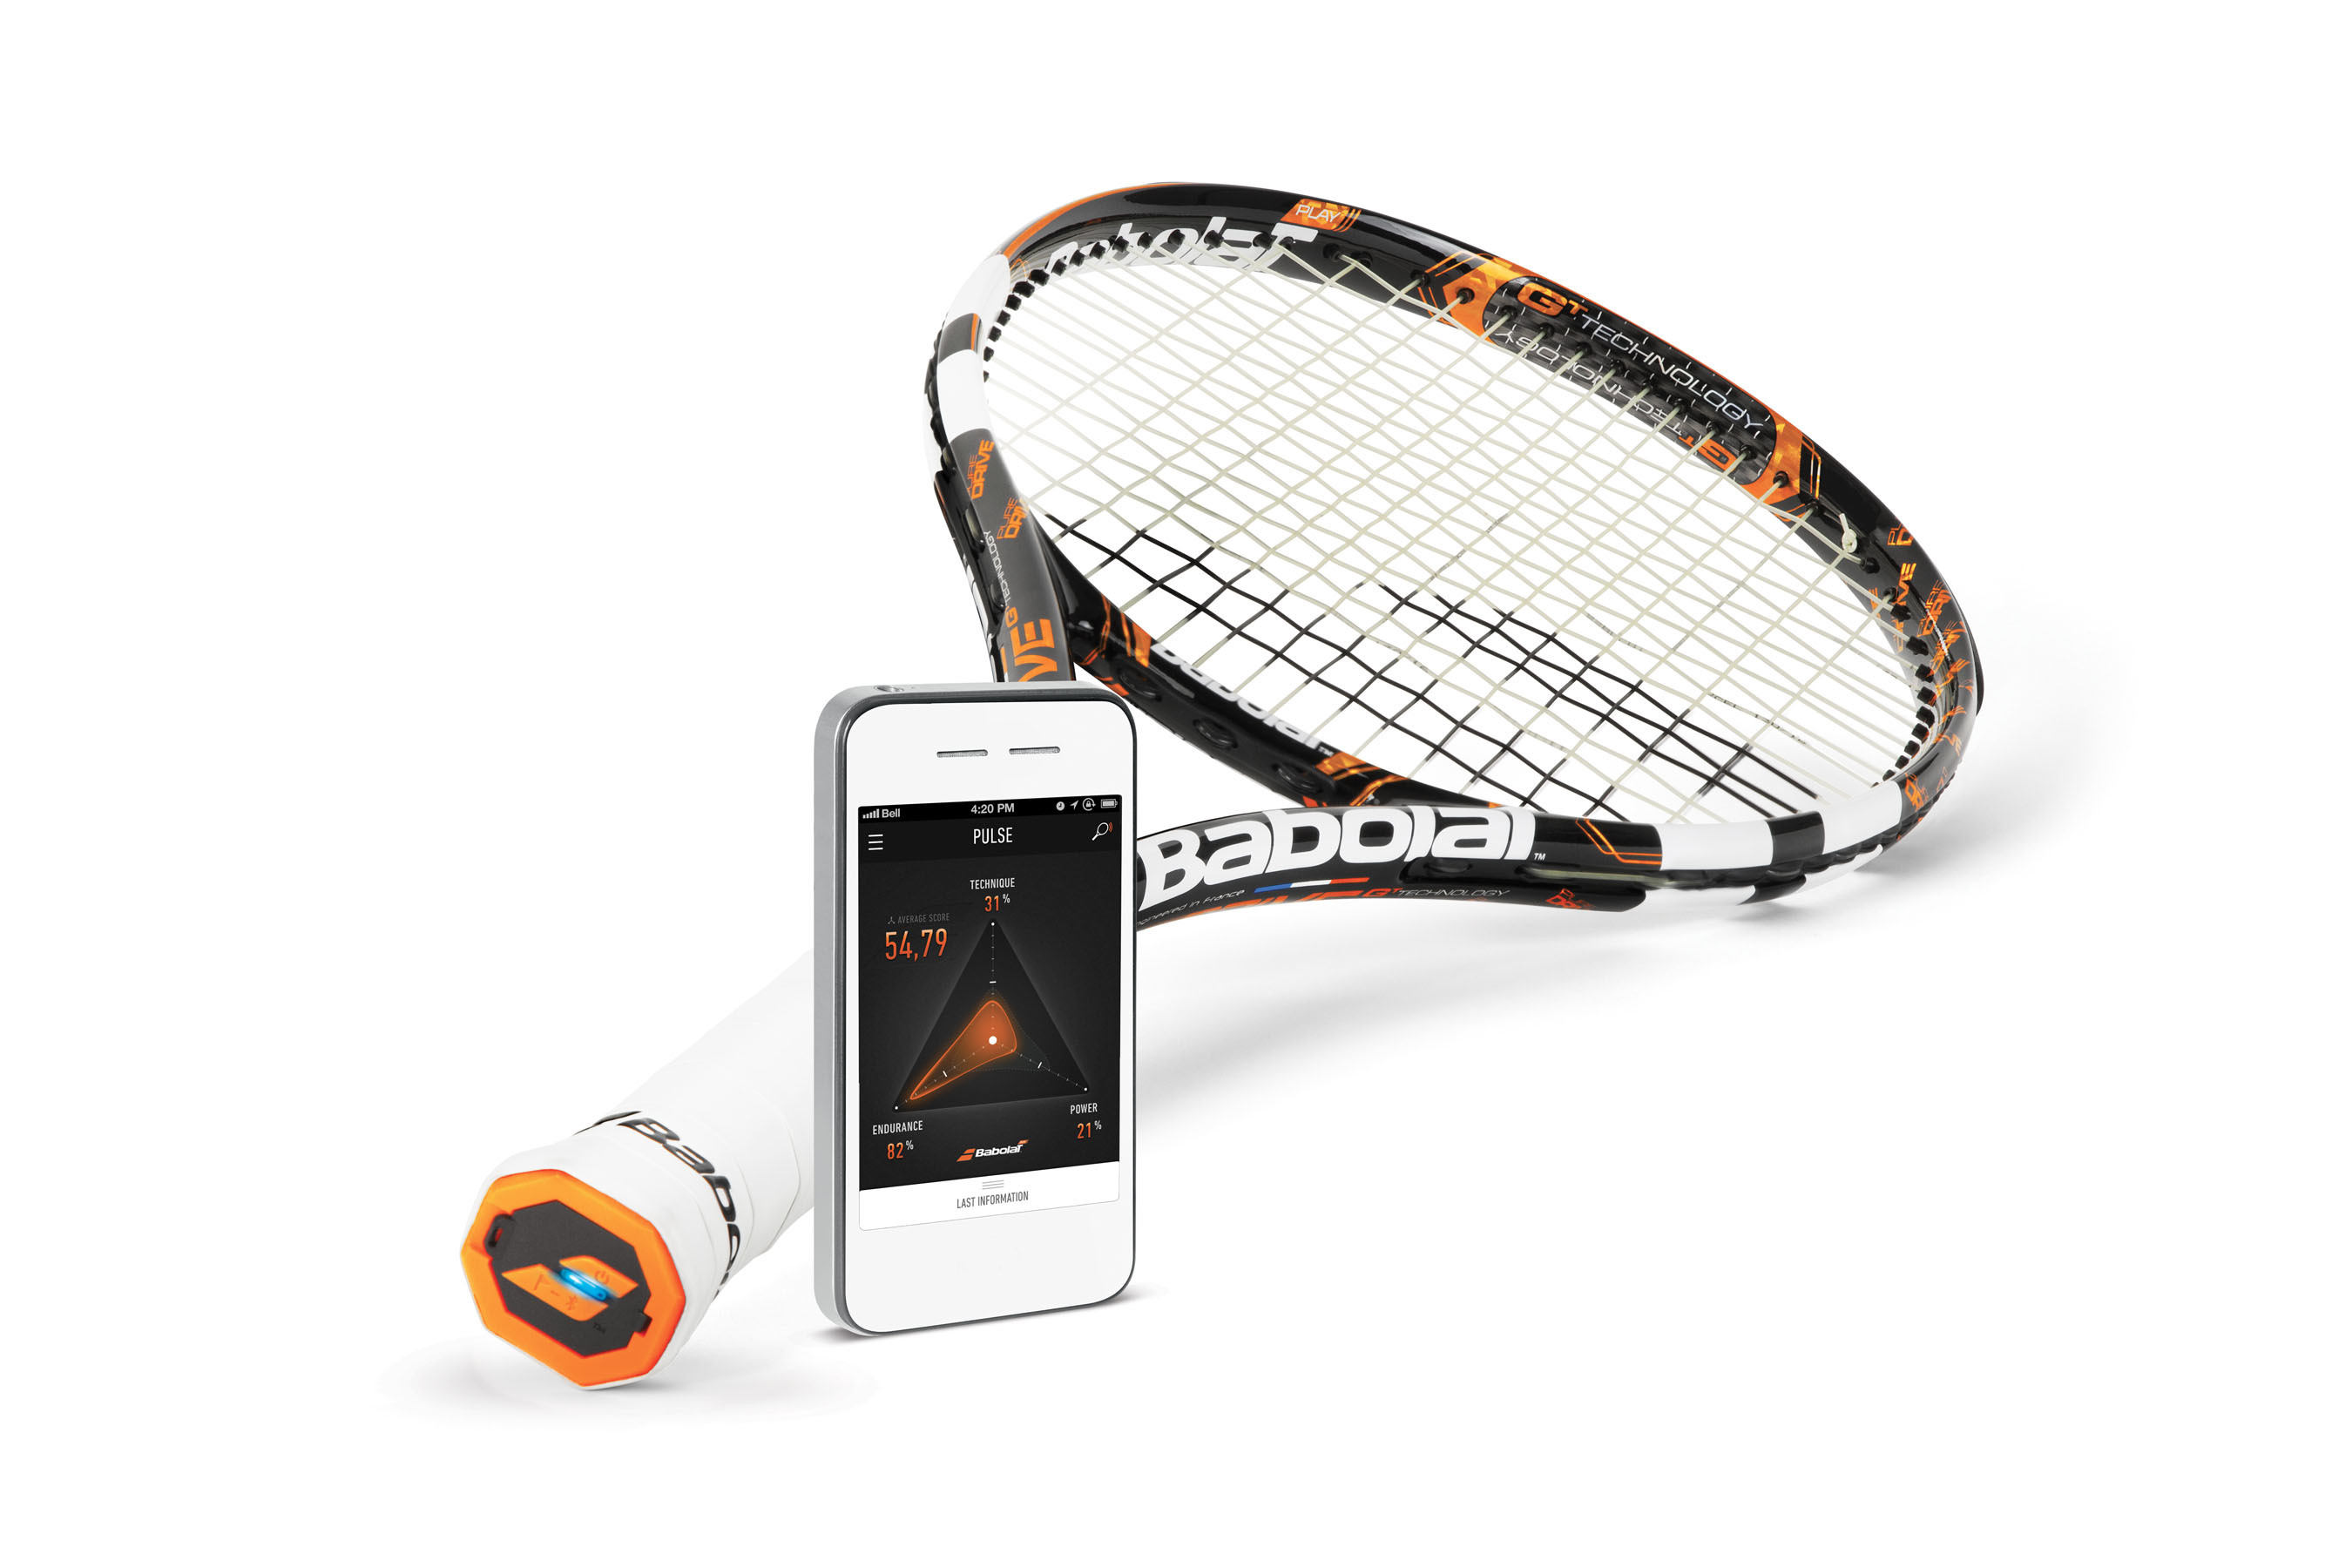 Babolat unveils yet another breakthrough innovation to the game of tennis: the new Babolat Play Pure Drive. Babolat Play, the world's first connected tennis racquet, allows every player to live a unique experience based on progression, fun and sharing. Sensors integrated into the handle of the Babolat Play racquet allow players to have access to exciting data about their game including shot power and ball impact location, adding concrete information to the sensations they already receive. The commercial launch of the Babolat Play Pure Drive is planned for December 2013 in the US.  www.babolat.com /  www.Facebook.com/Babolat . (PRNewsFoto/Babolat) (PRNewsFoto/)